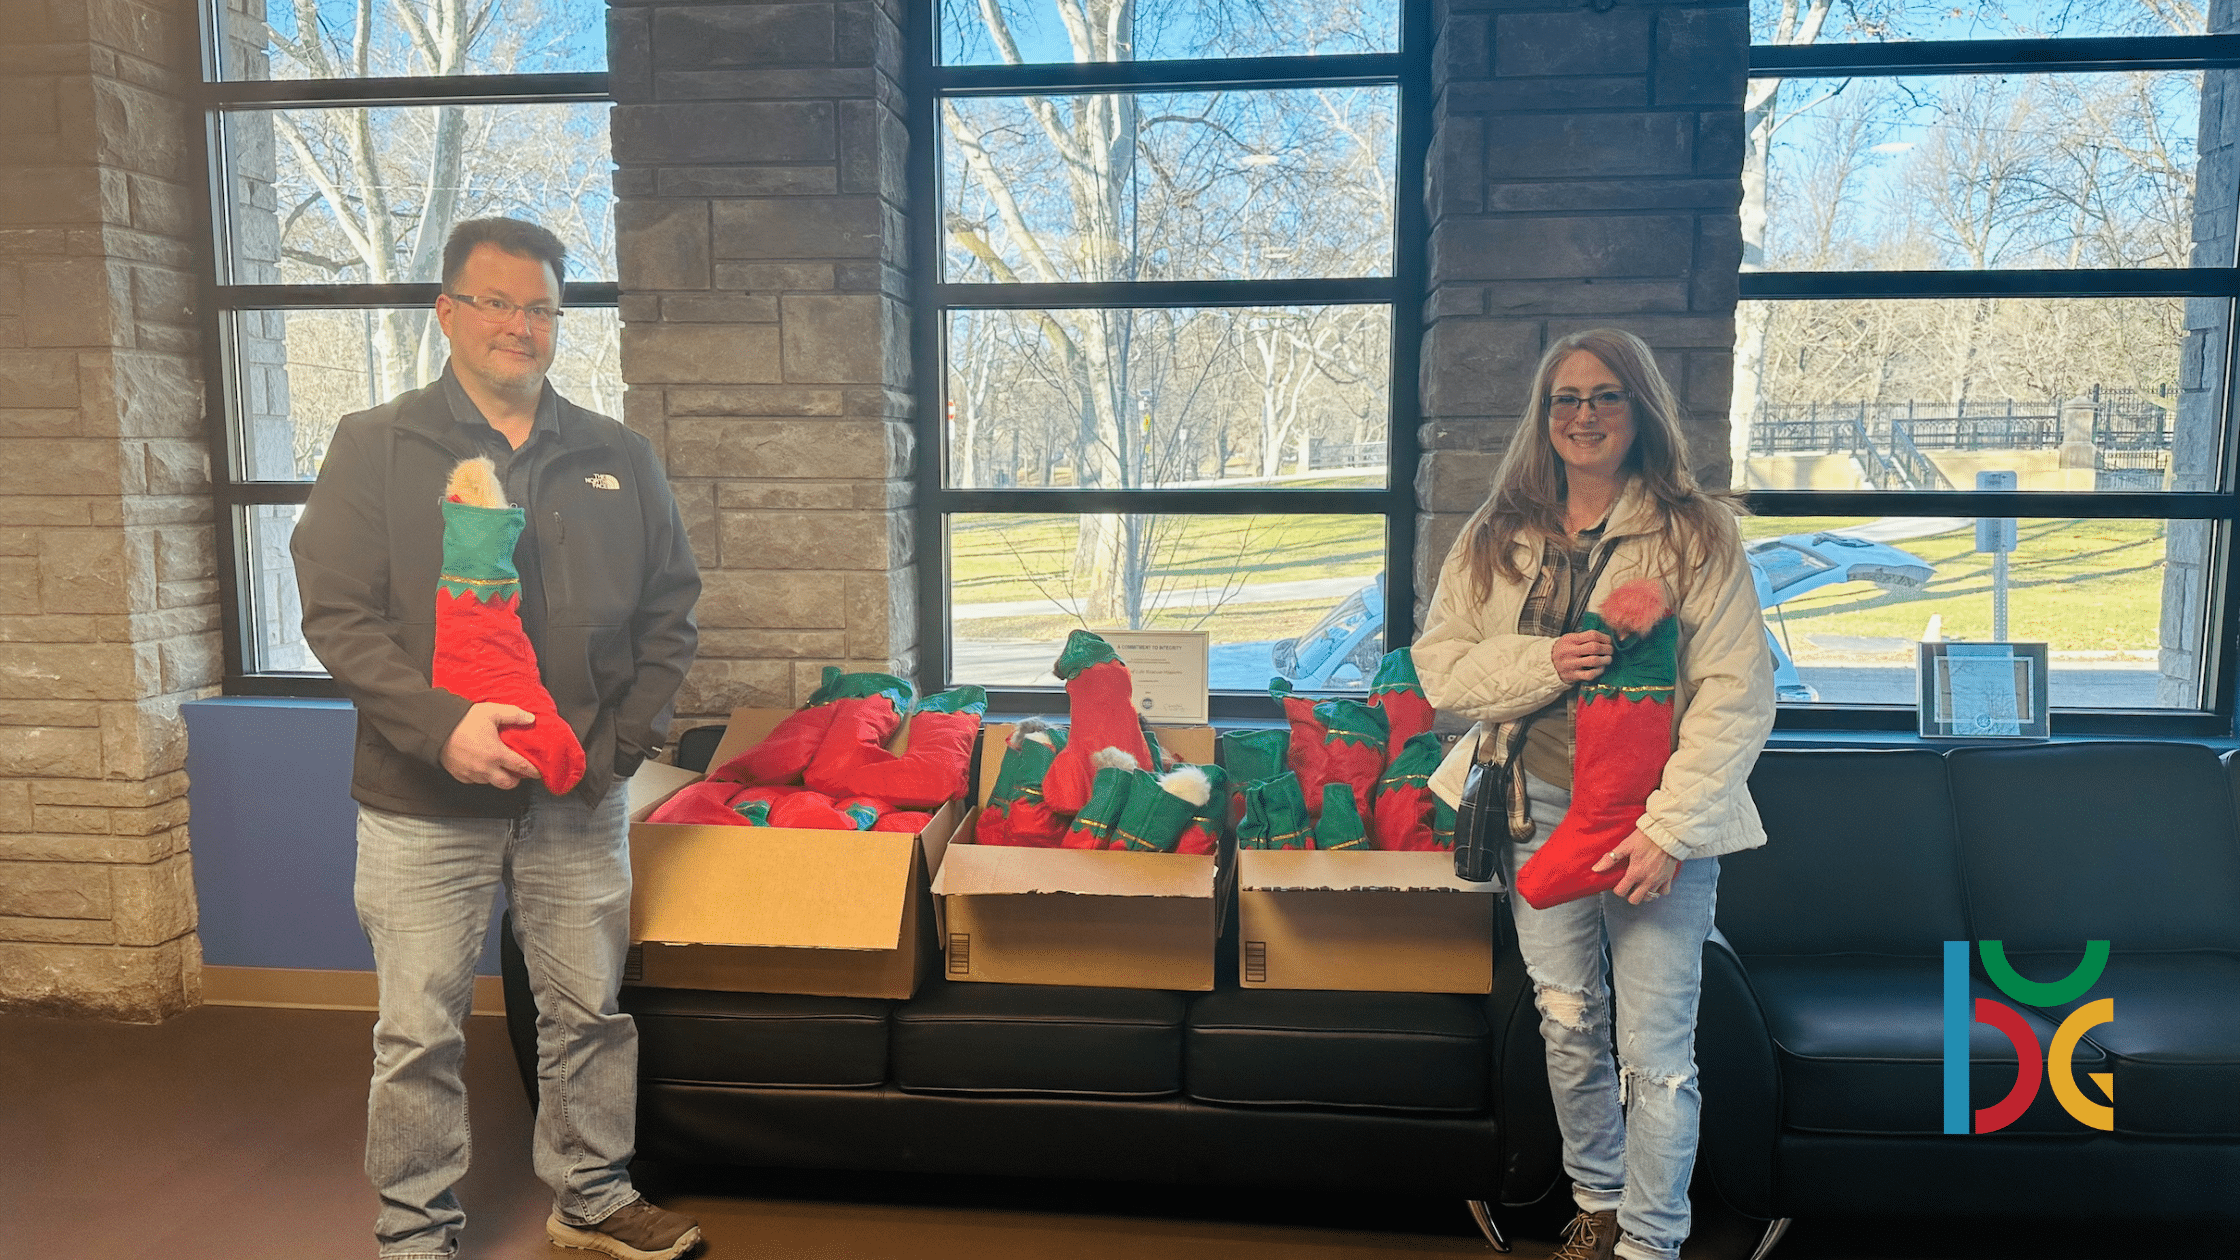 Light of Life Rescue Mission's Christmas Campaign